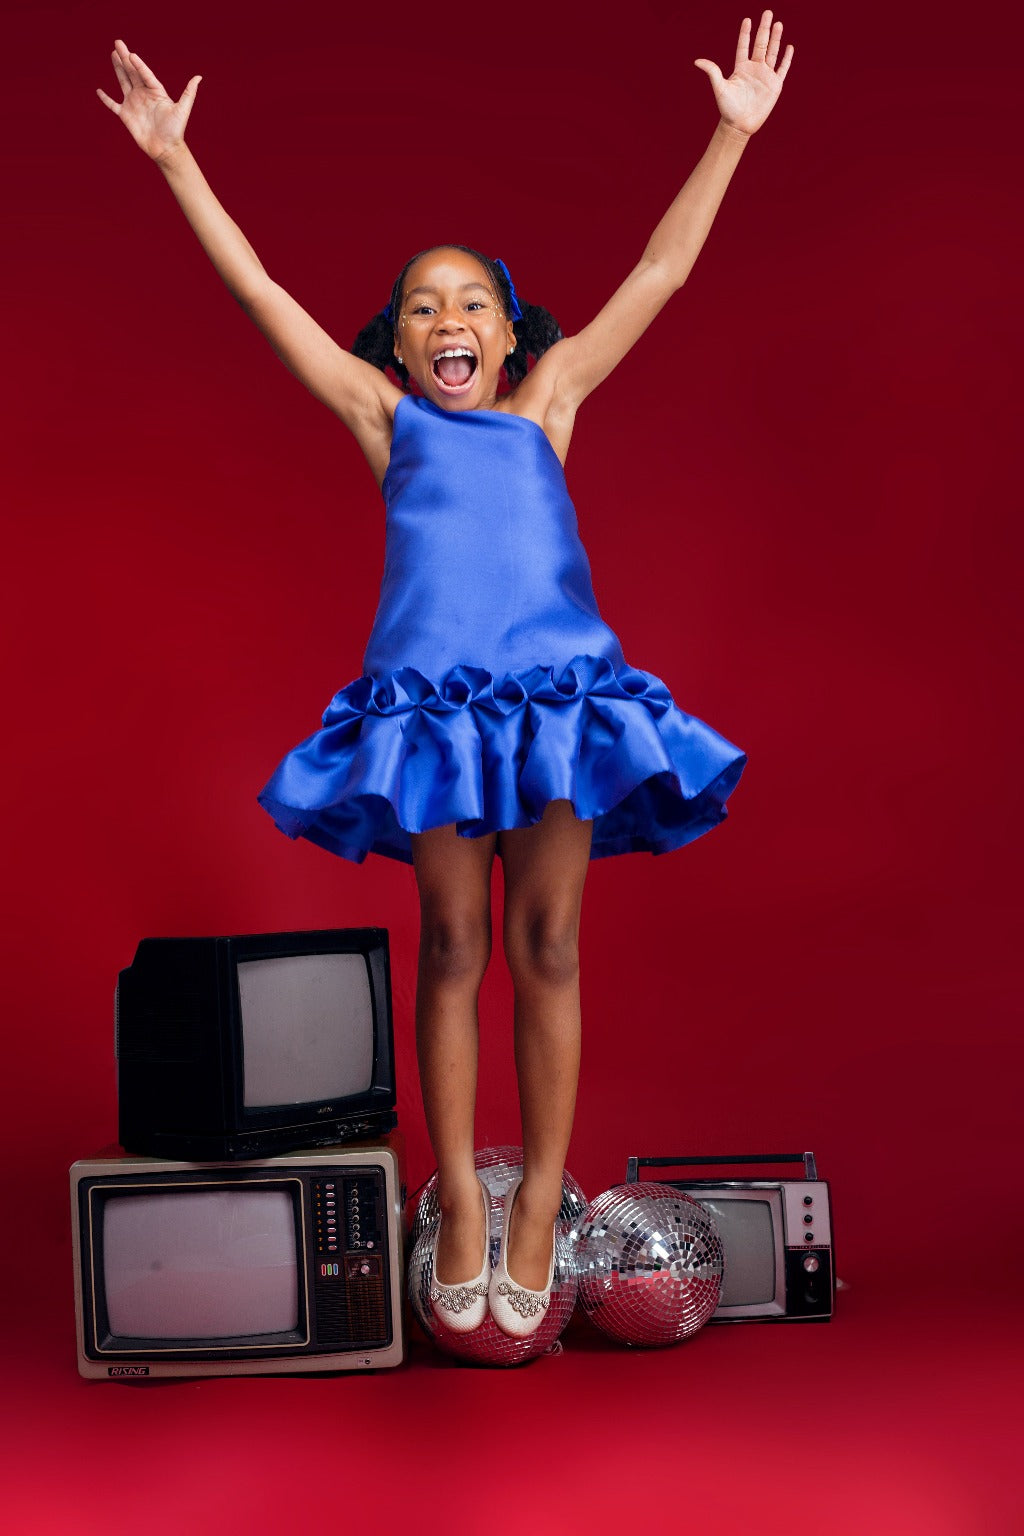 A smiling kid model wearing a one-shoulder blue dress with drop waist ruffle detailing in a red room